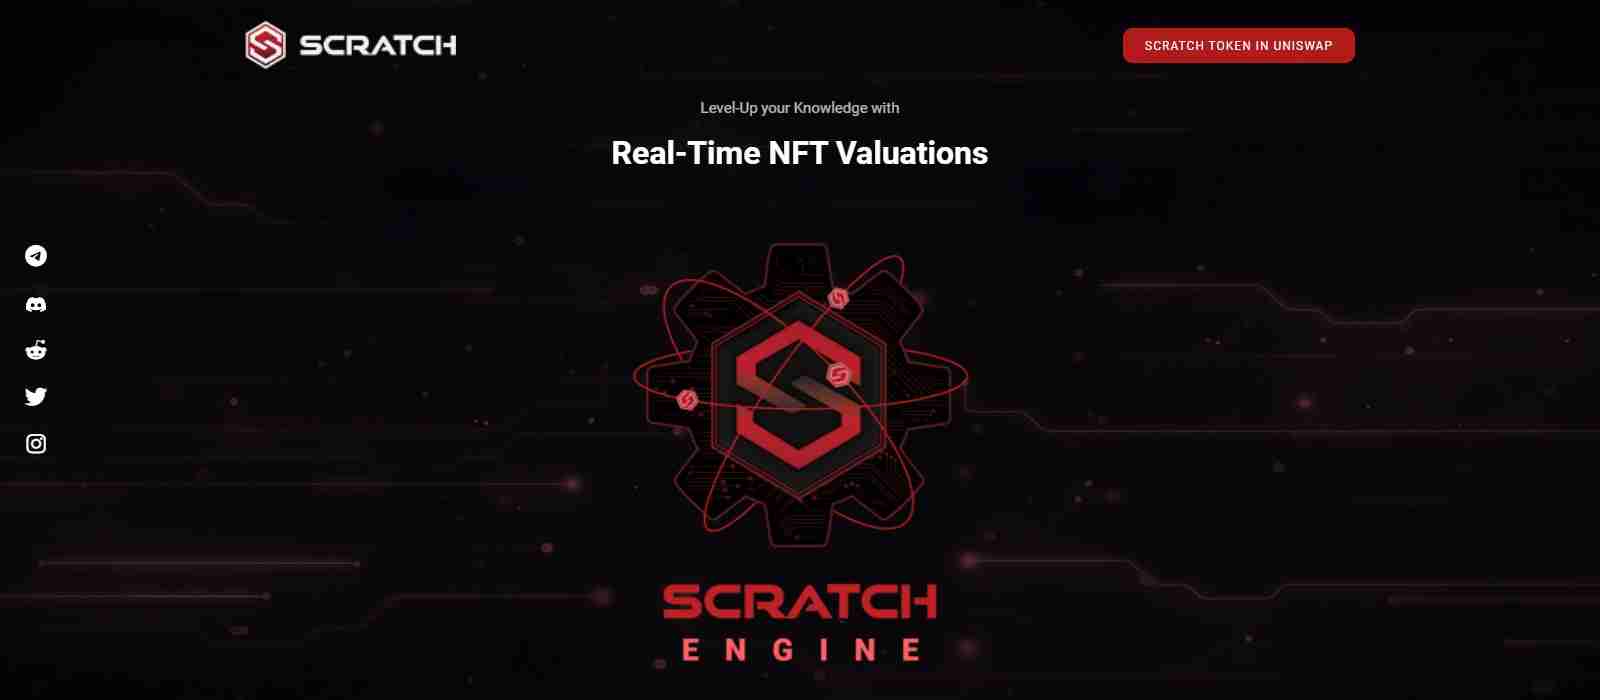 Scratch Engine Airdrop Review: Real-Time NFT Valuations